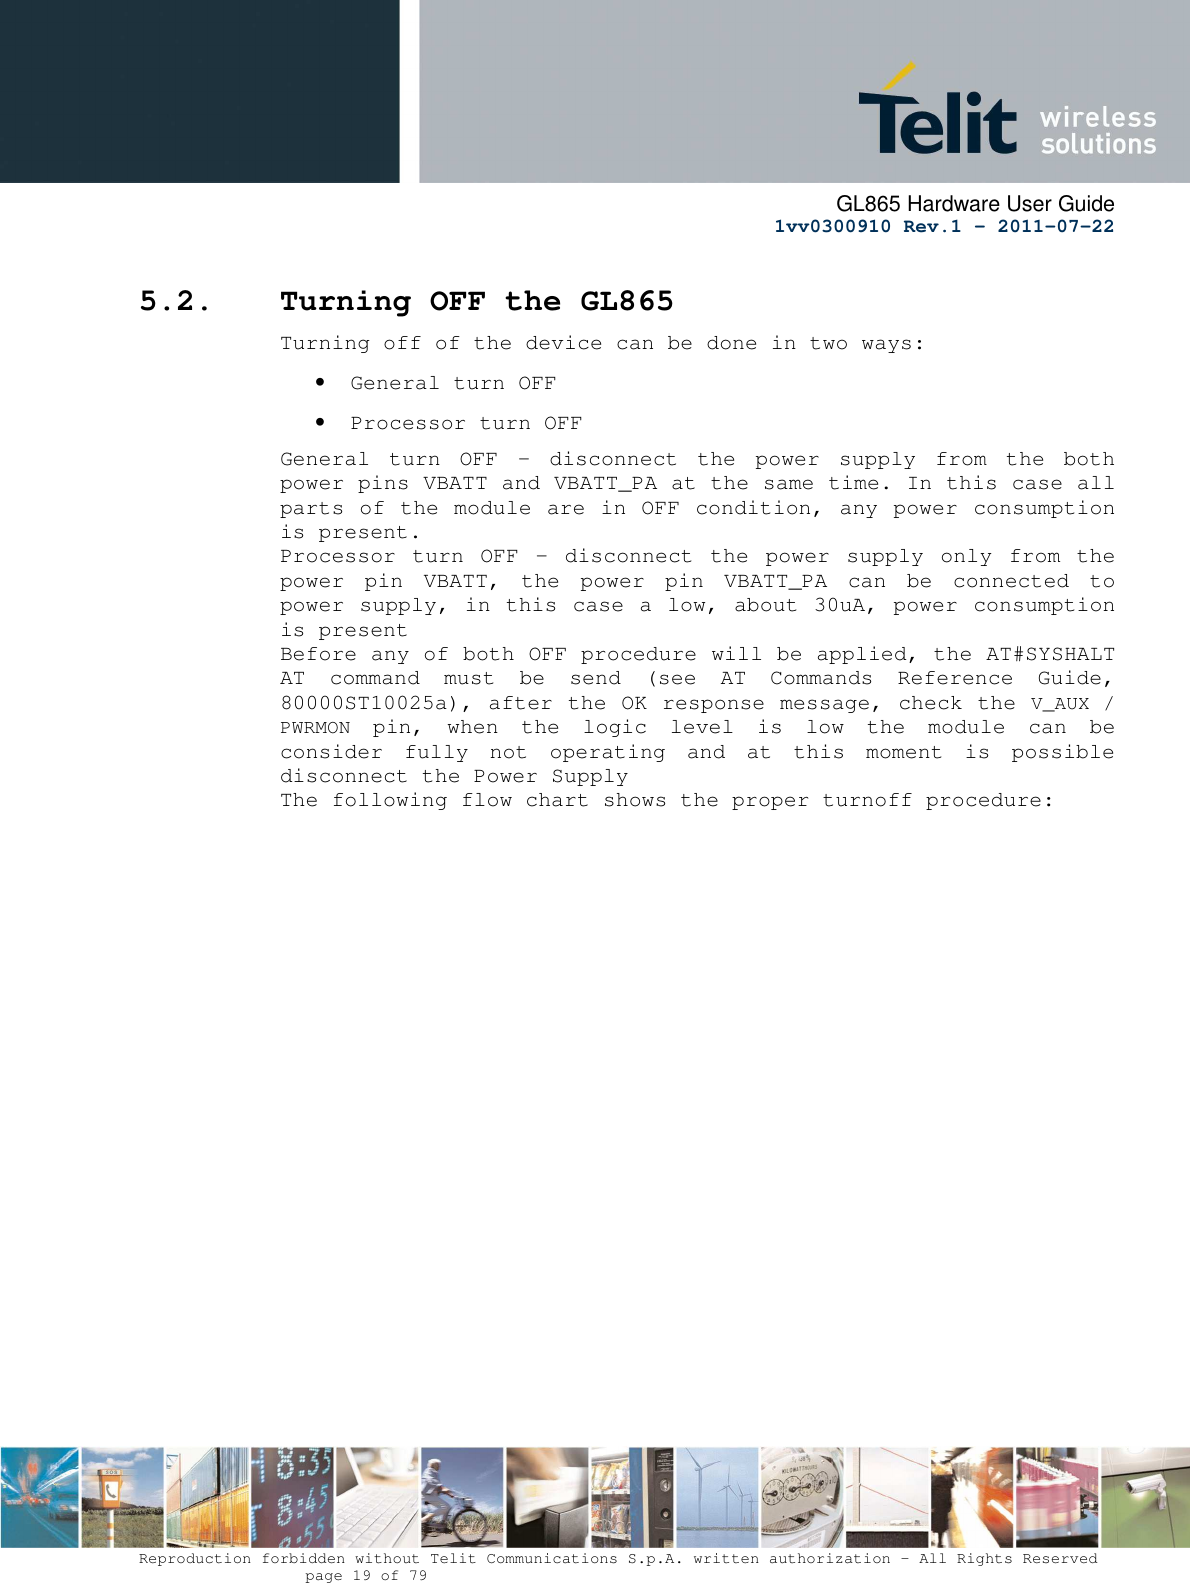      GL865 Hardware User Guide     1vv0300910 Rev.1 – 2011-07-22       Reproduction forbidden without Telit Communications S.p.A. written authorization - All Rights Reserved    page 19 of 79  5.2. Turning OFF the GL865 Turning off of the device can be done in two ways: • General turn OFF • Processor turn OFF General  turn  OFF  –  disconnect  the  power  supply  from  the  both power pins VBATT and VBATT_PA at the same time. In this case all parts of the module are in OFF condition, any power consumption is present. Processor  turn  OFF  –  disconnect  the  power  supply  only  from the power  pin  VBATT,  the  power  pin  VBATT_PA  can  be  connected  to power supply, in this case a low, about 30uA, power consumption is present  Before any of both OFF procedure will be applied, the AT#SYSHALT AT  command  must  be  send  (see  AT  Commands  Reference  Guide, 80000ST10025a), after the OK response message, check the V_AUX / PWRMON  pin,  when  the  logic  level  is  low  the  module  can  be consider  fully  not  operating  and  at  this  moment  is  possible disconnect the Power Supply The following flow chart shows the proper turnoff procedure: 